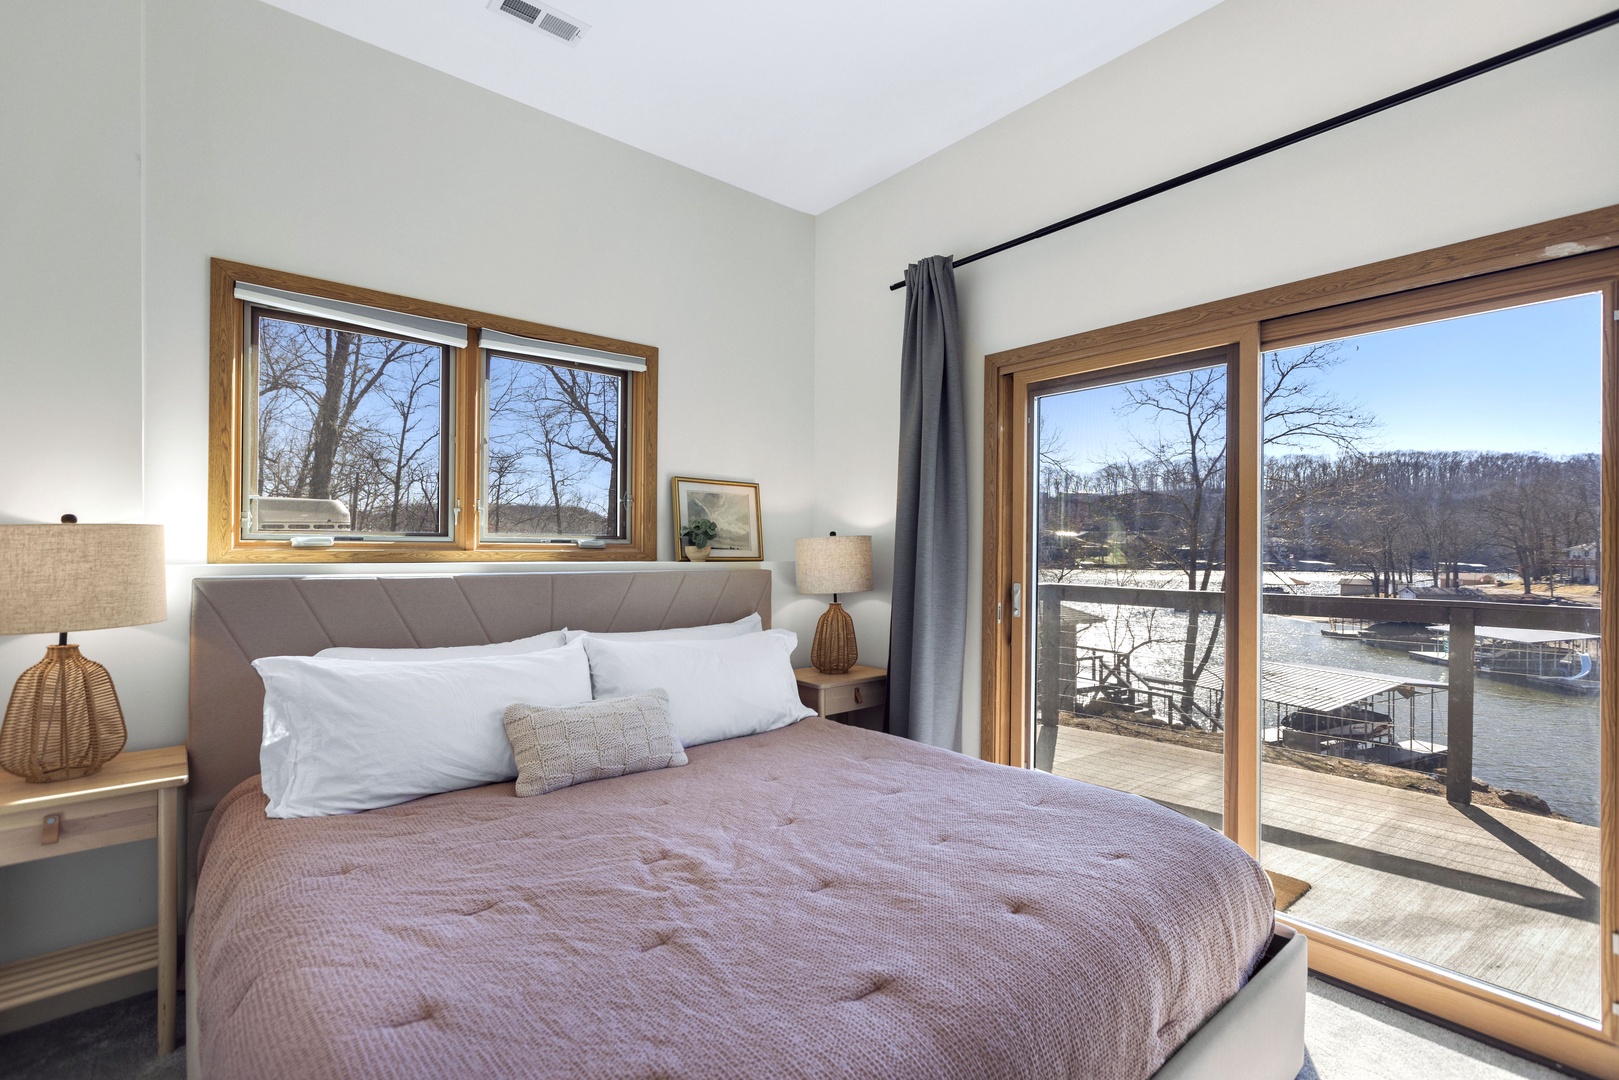 Big Bear - The fourth bedroom offers a plush king bed & deck access